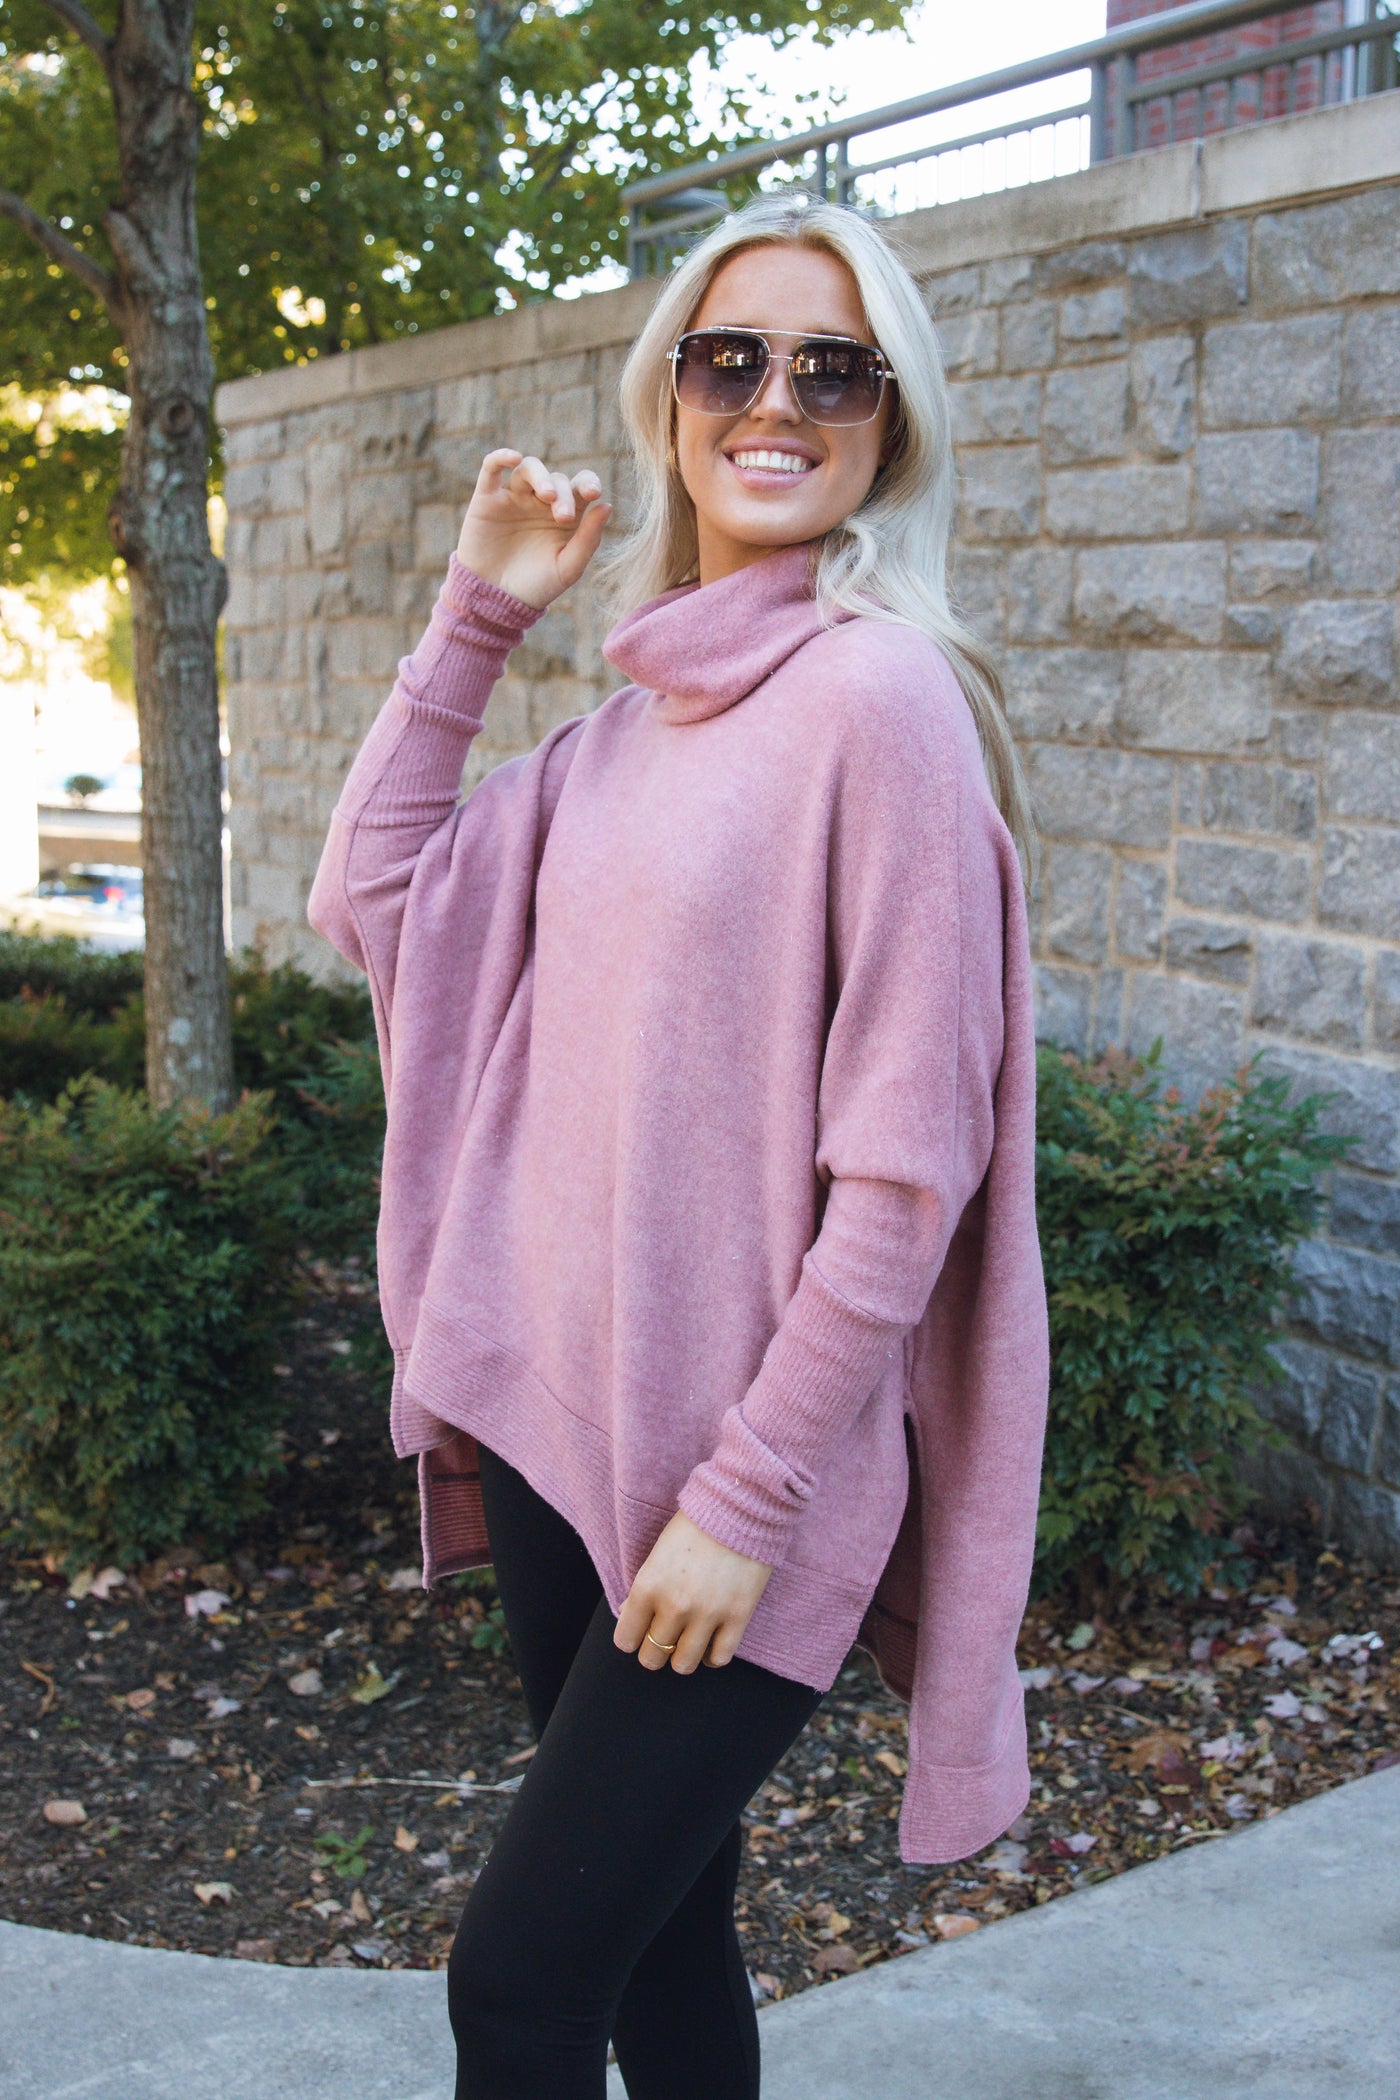 Comfy Mauve Pink Cowl Neck Sweater- Cute Oversized Sweater- $44